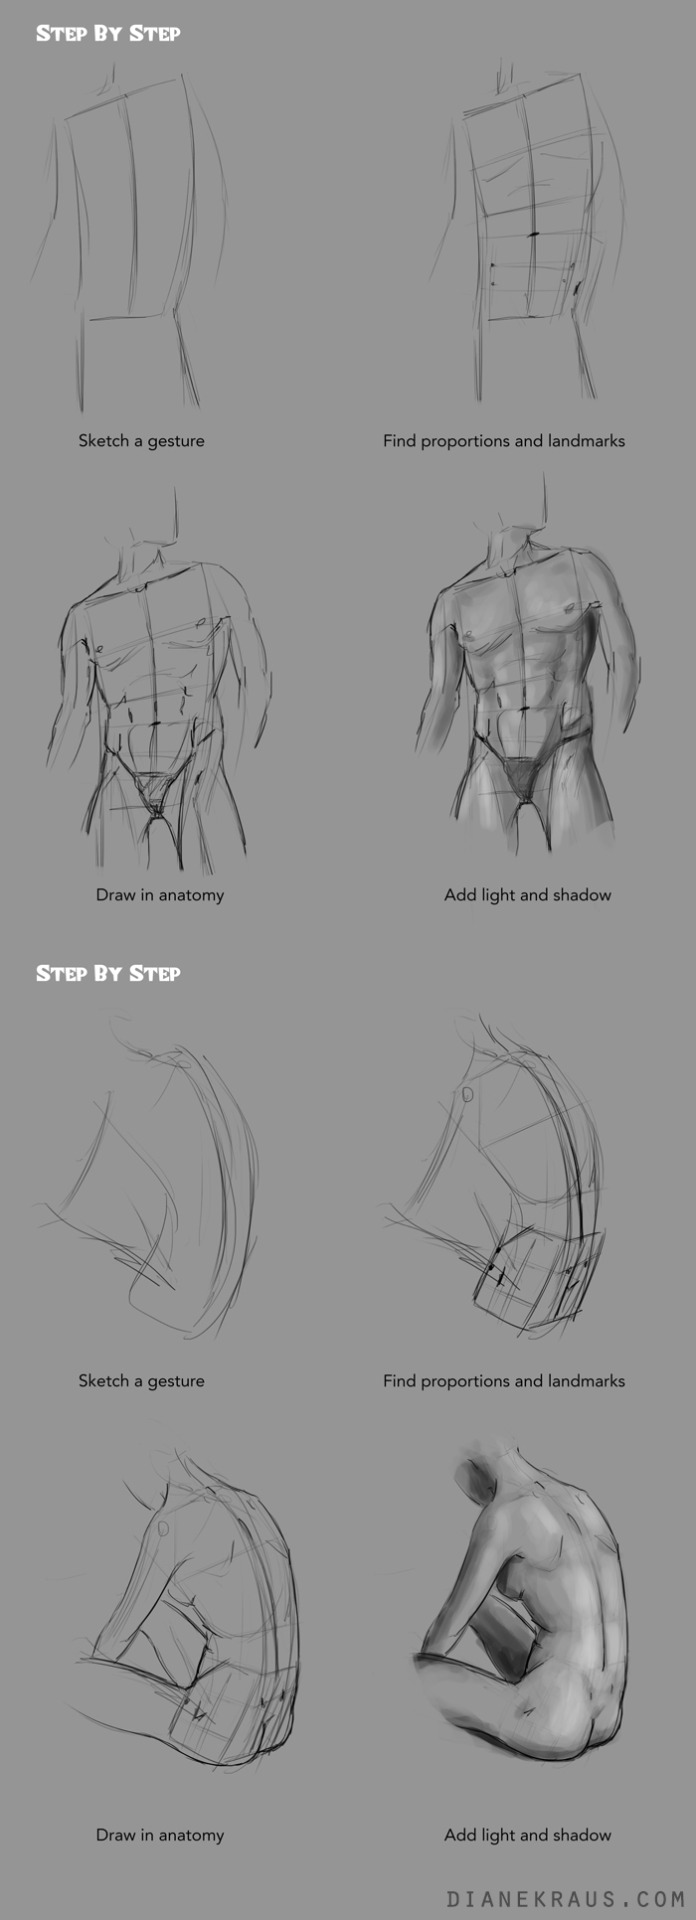 dianekraus:  At long last, the hip tutorial appears! Poor neglected hips, such an